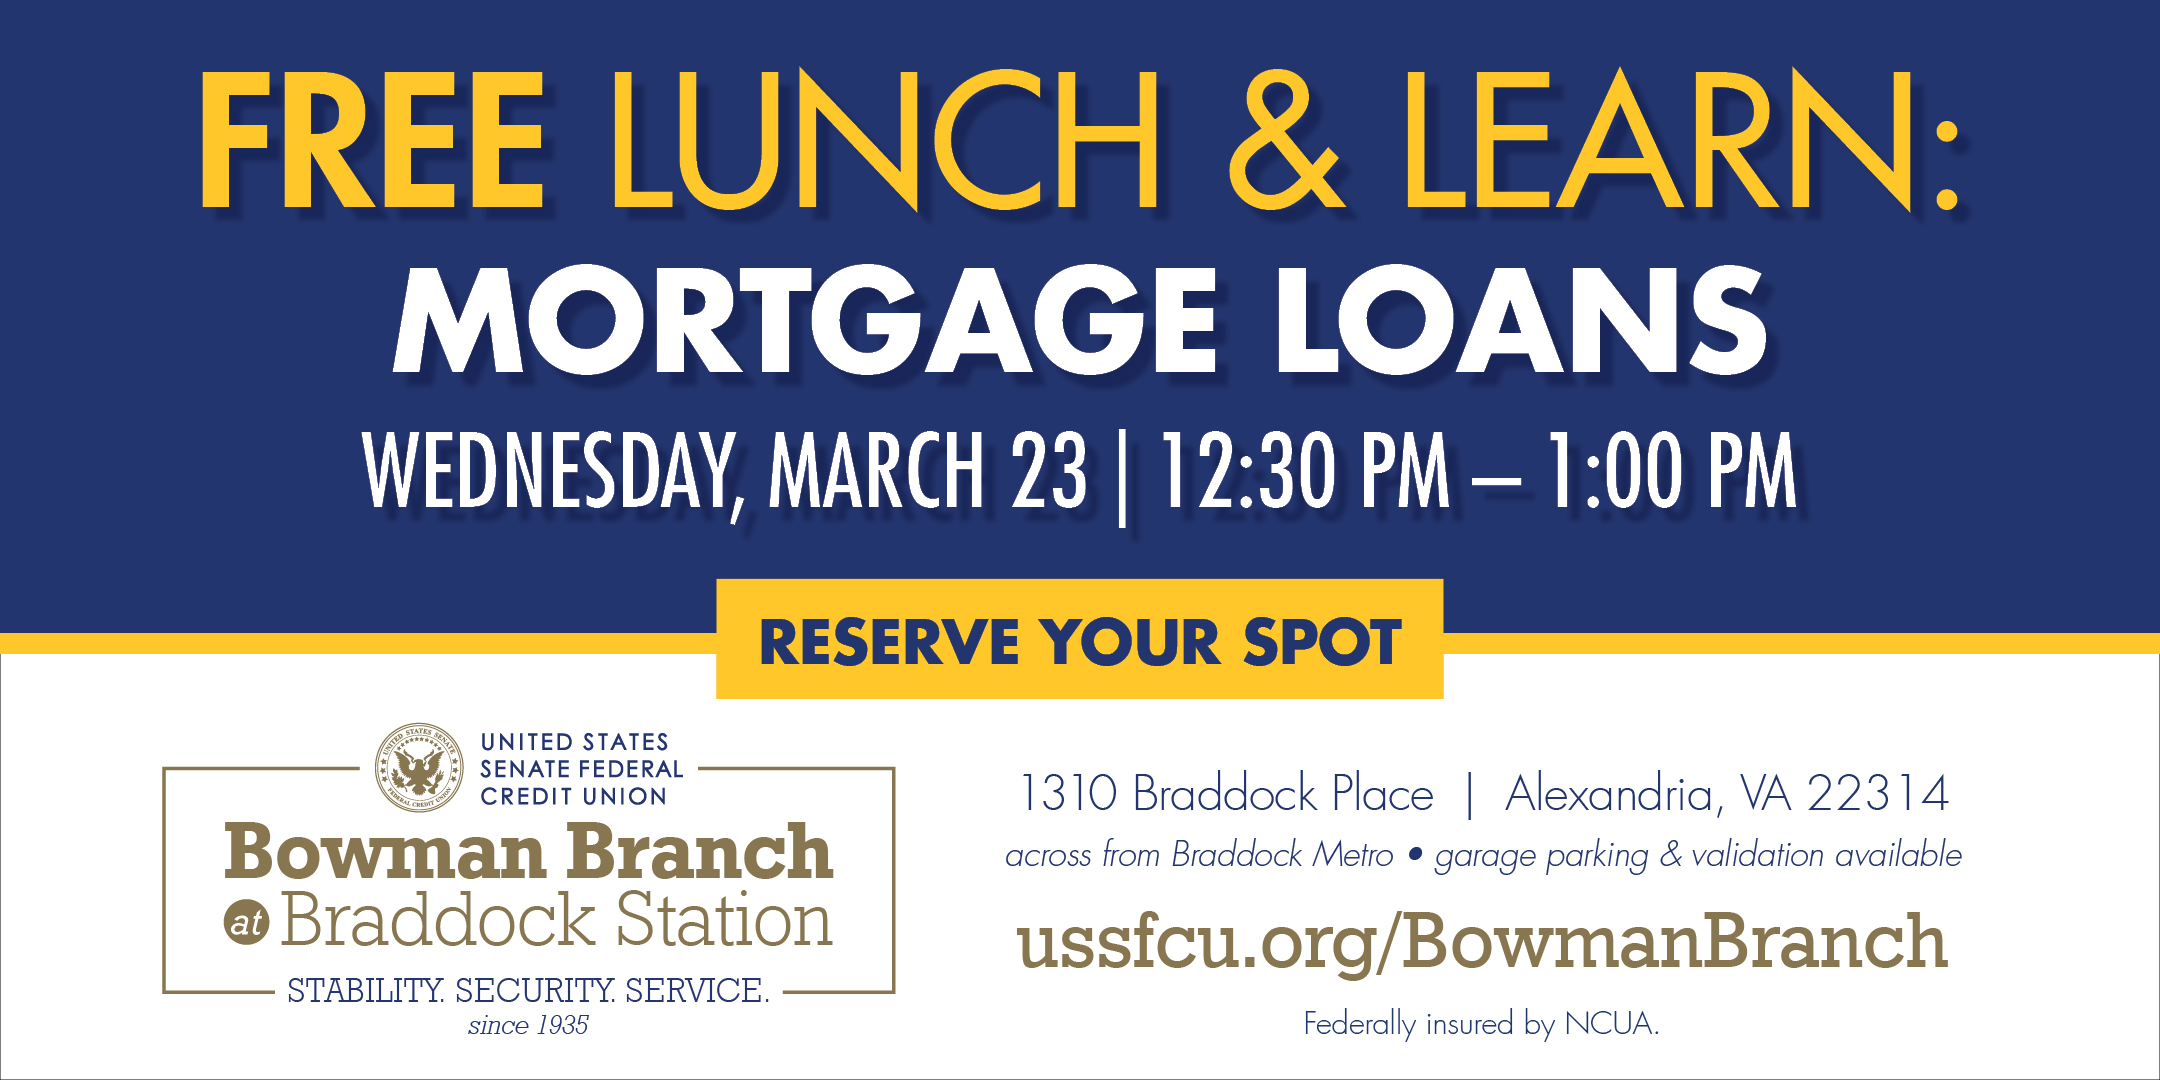 USSFCU Mortgage Lunch & Learn March 23